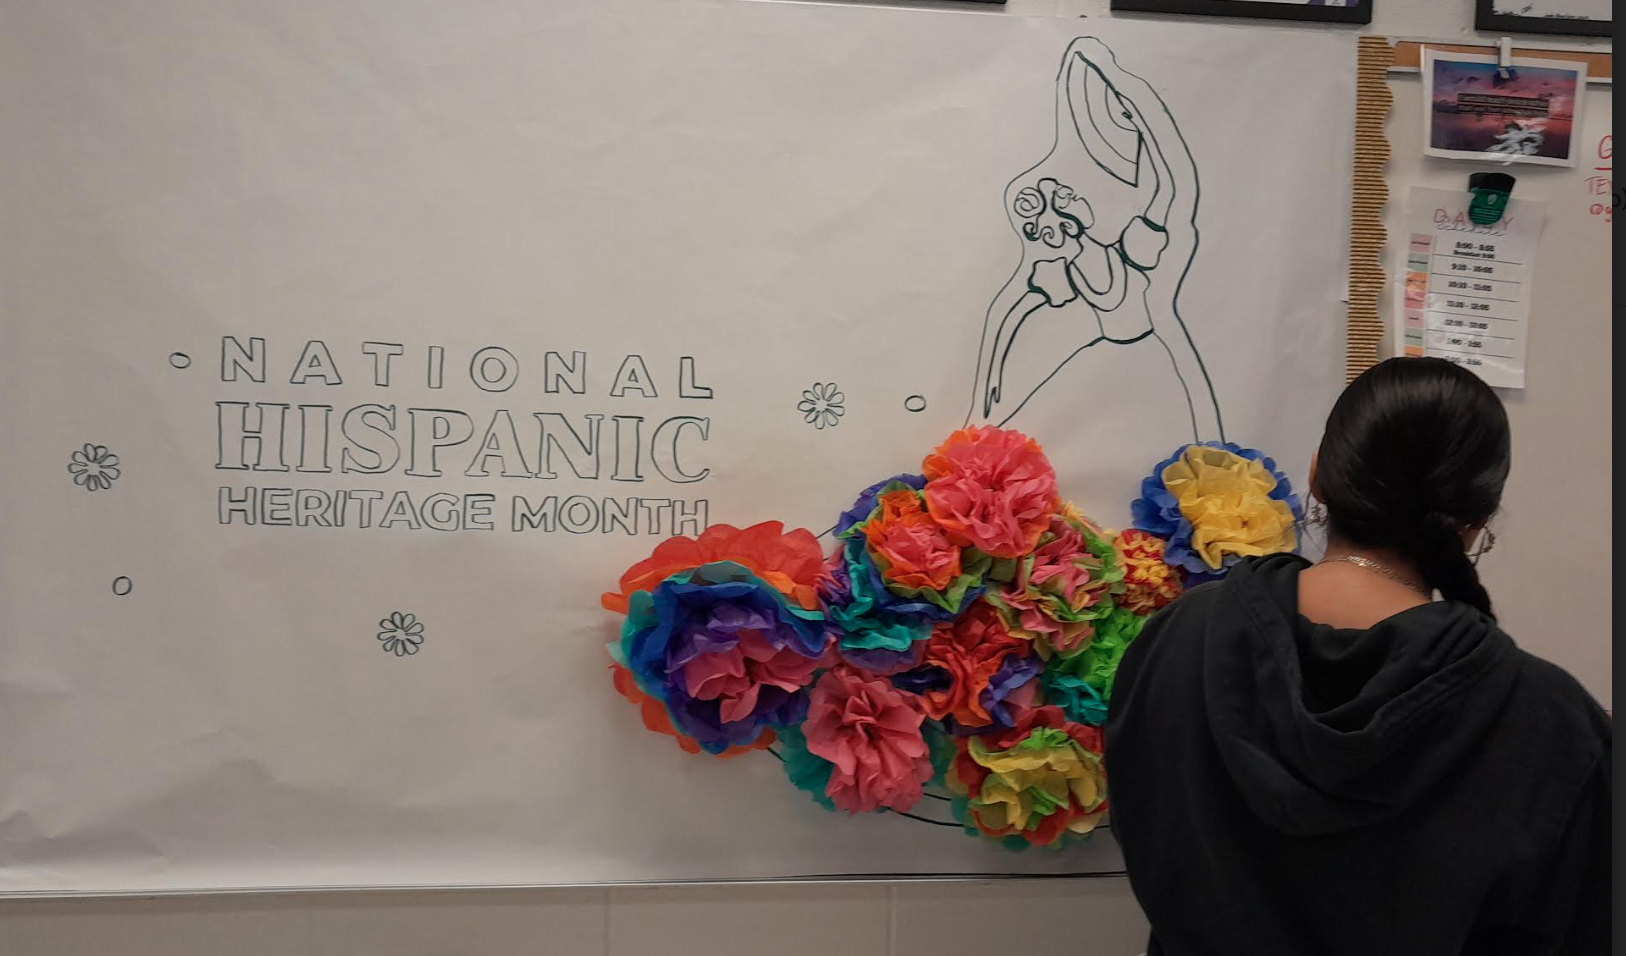 Hand-made paper flowers were attached to depict the colorful folklorico dress of the dancer.